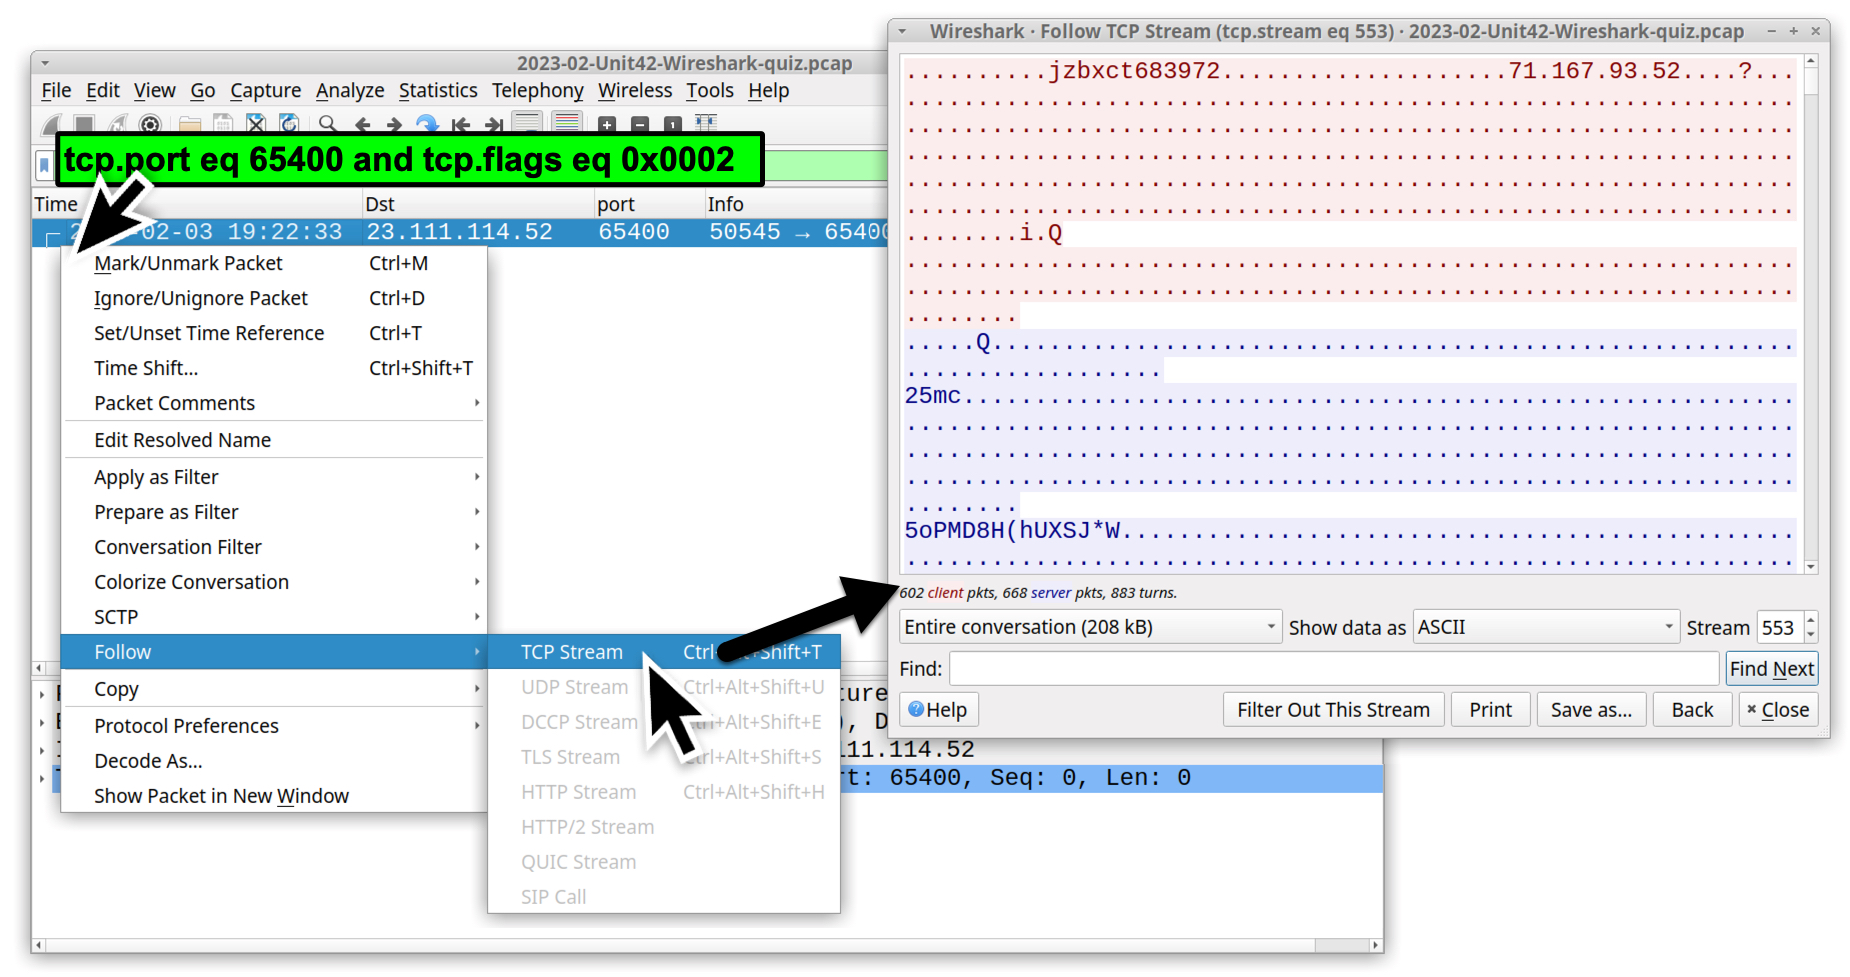 Image 12 is a screenshot of Wireshark showing the Qakbot traffic after selecting the TCP Stream option.